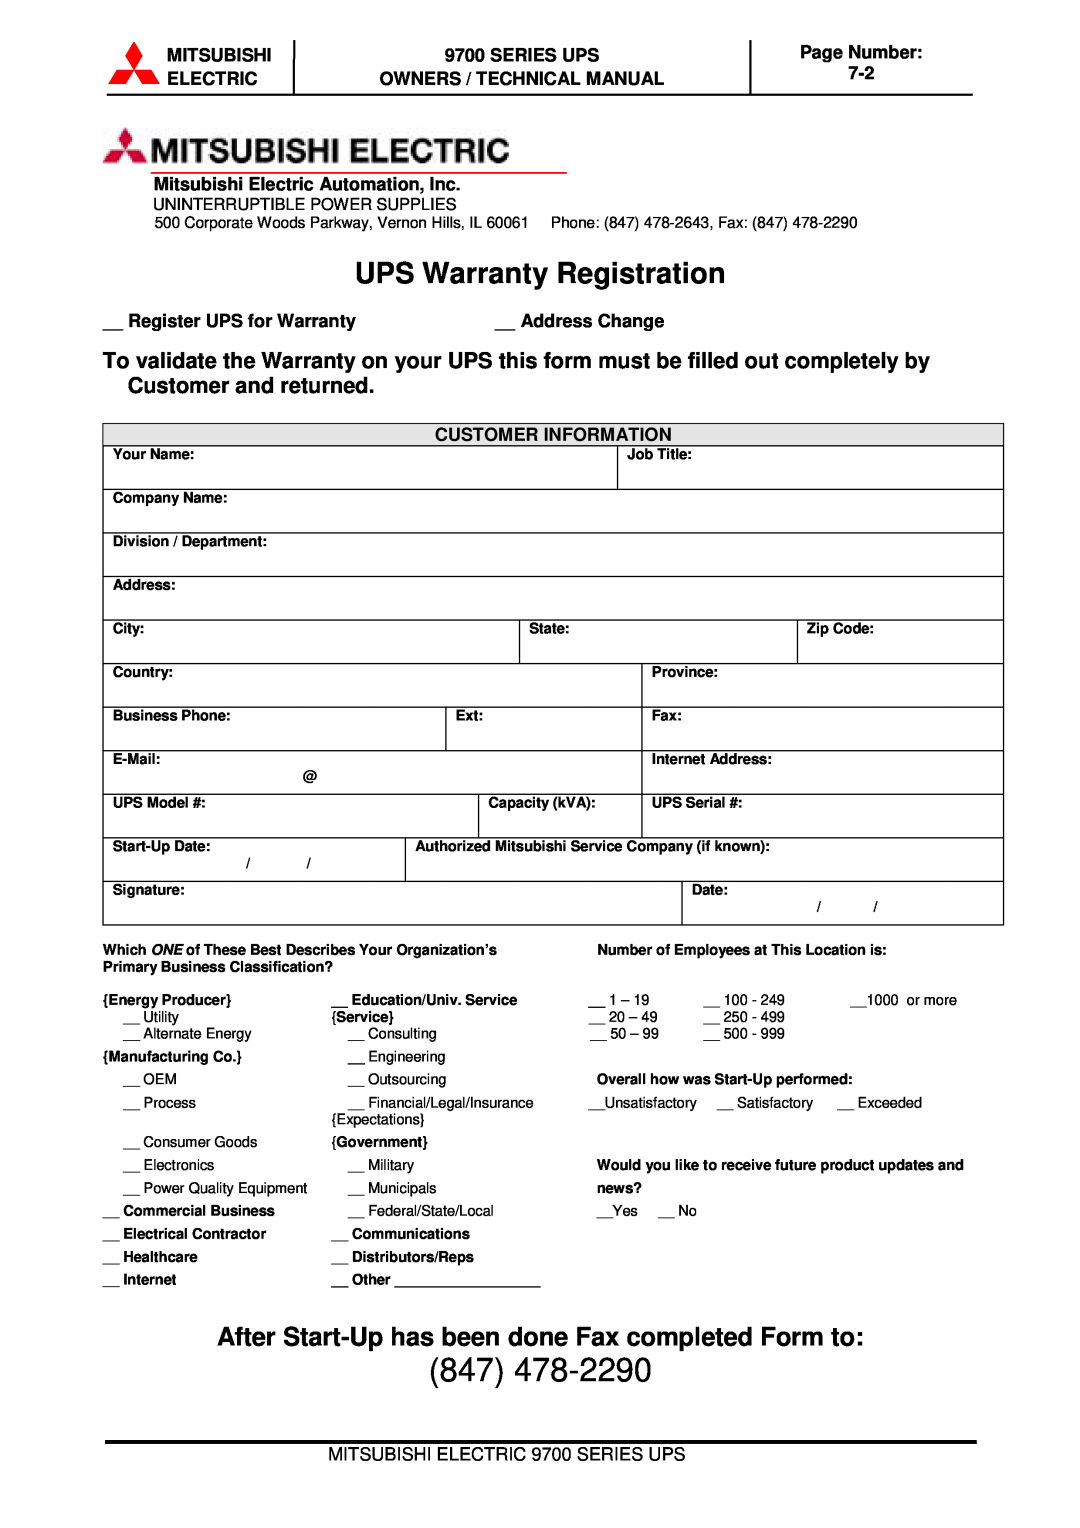 Mitsubishi Electronics 9700 Series UPS Warranty Registration, After Start-Up has been done Fax completed Form to 